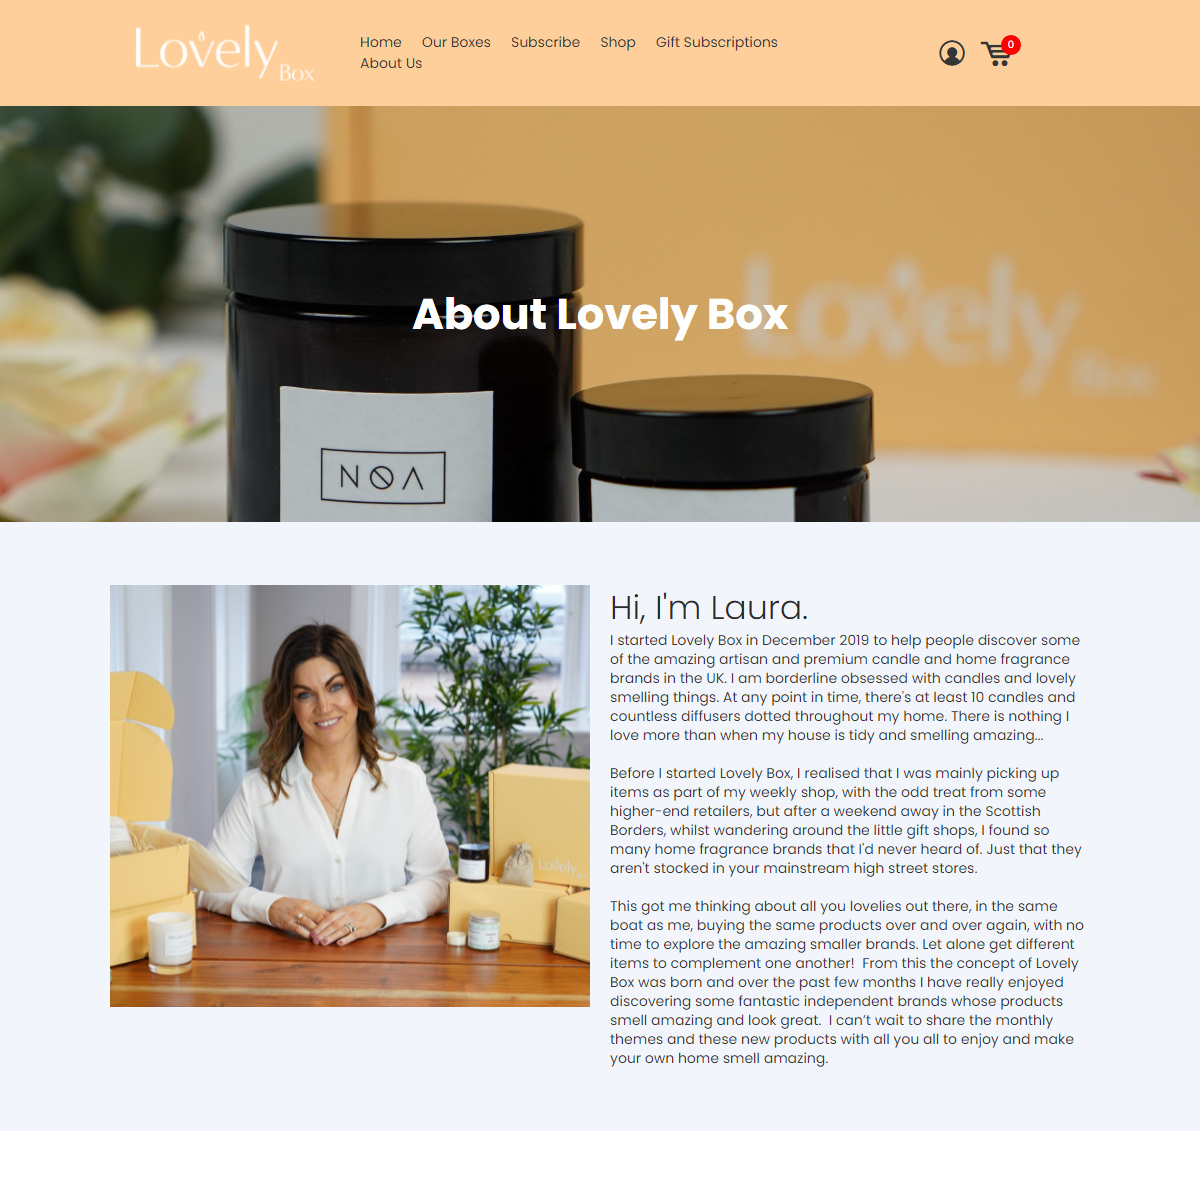 A complete backup of https://www.lovelybox.co.uk/about-us